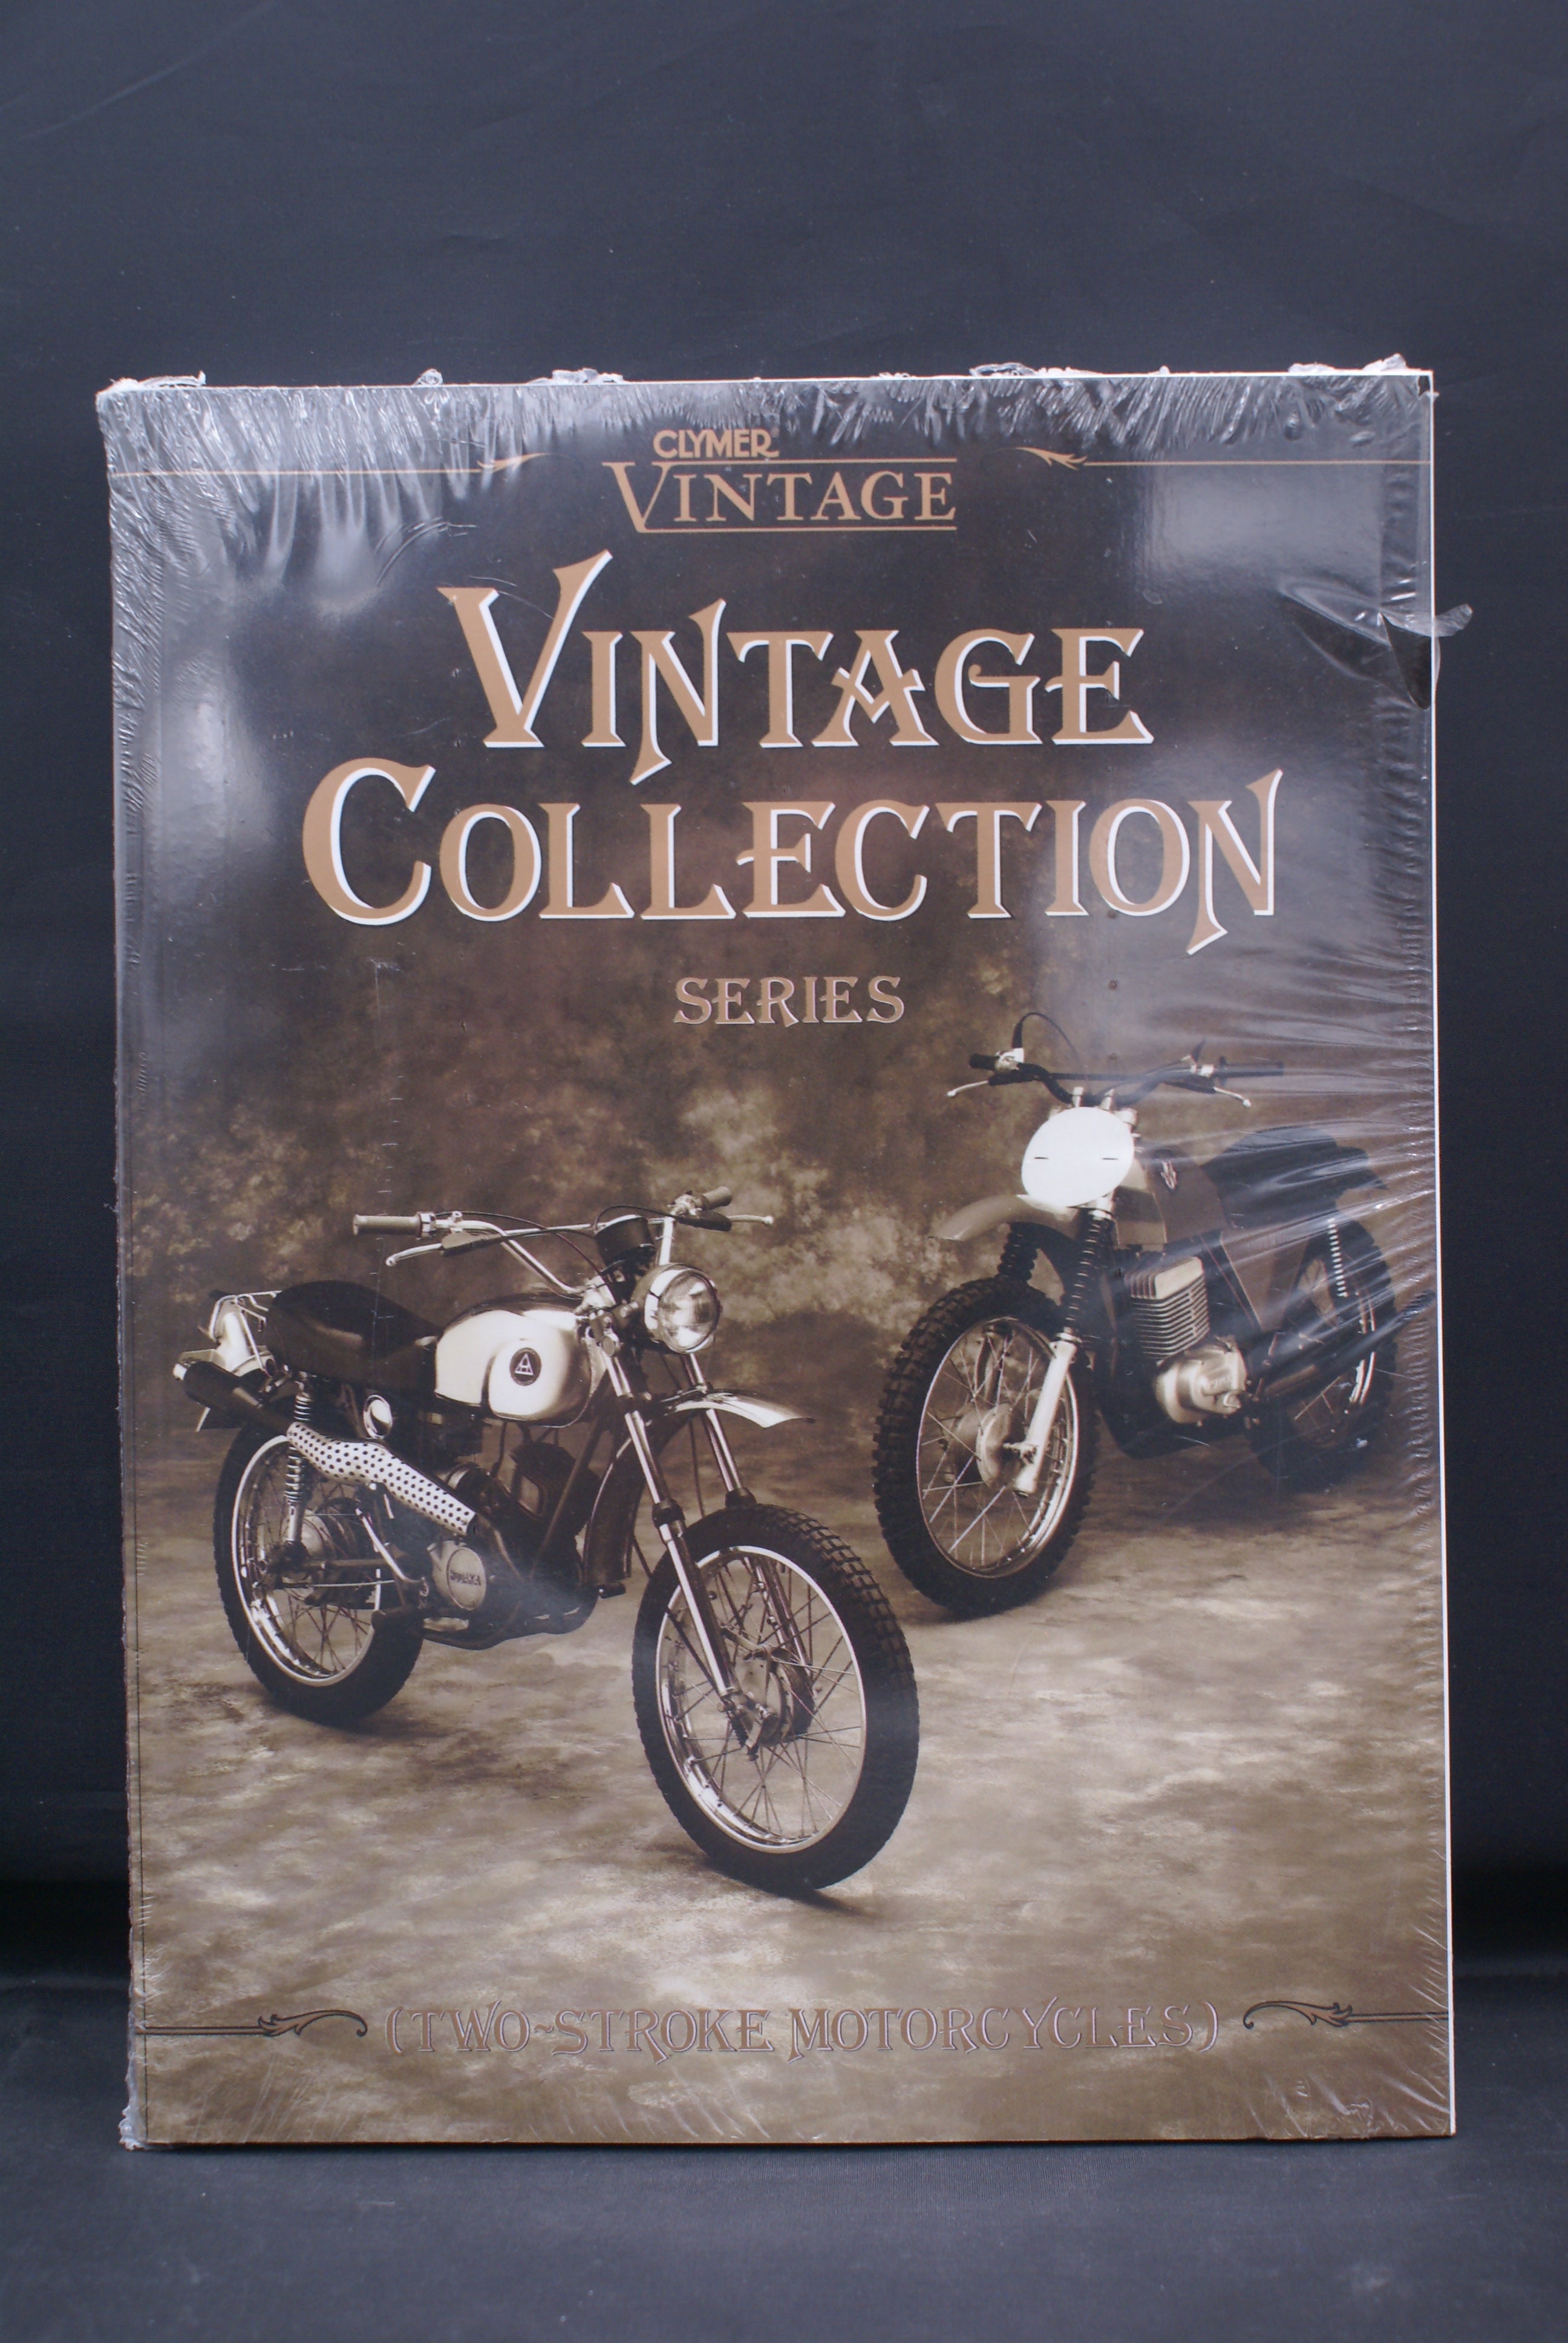 Clymer Vintage Collection, Two-Stroke